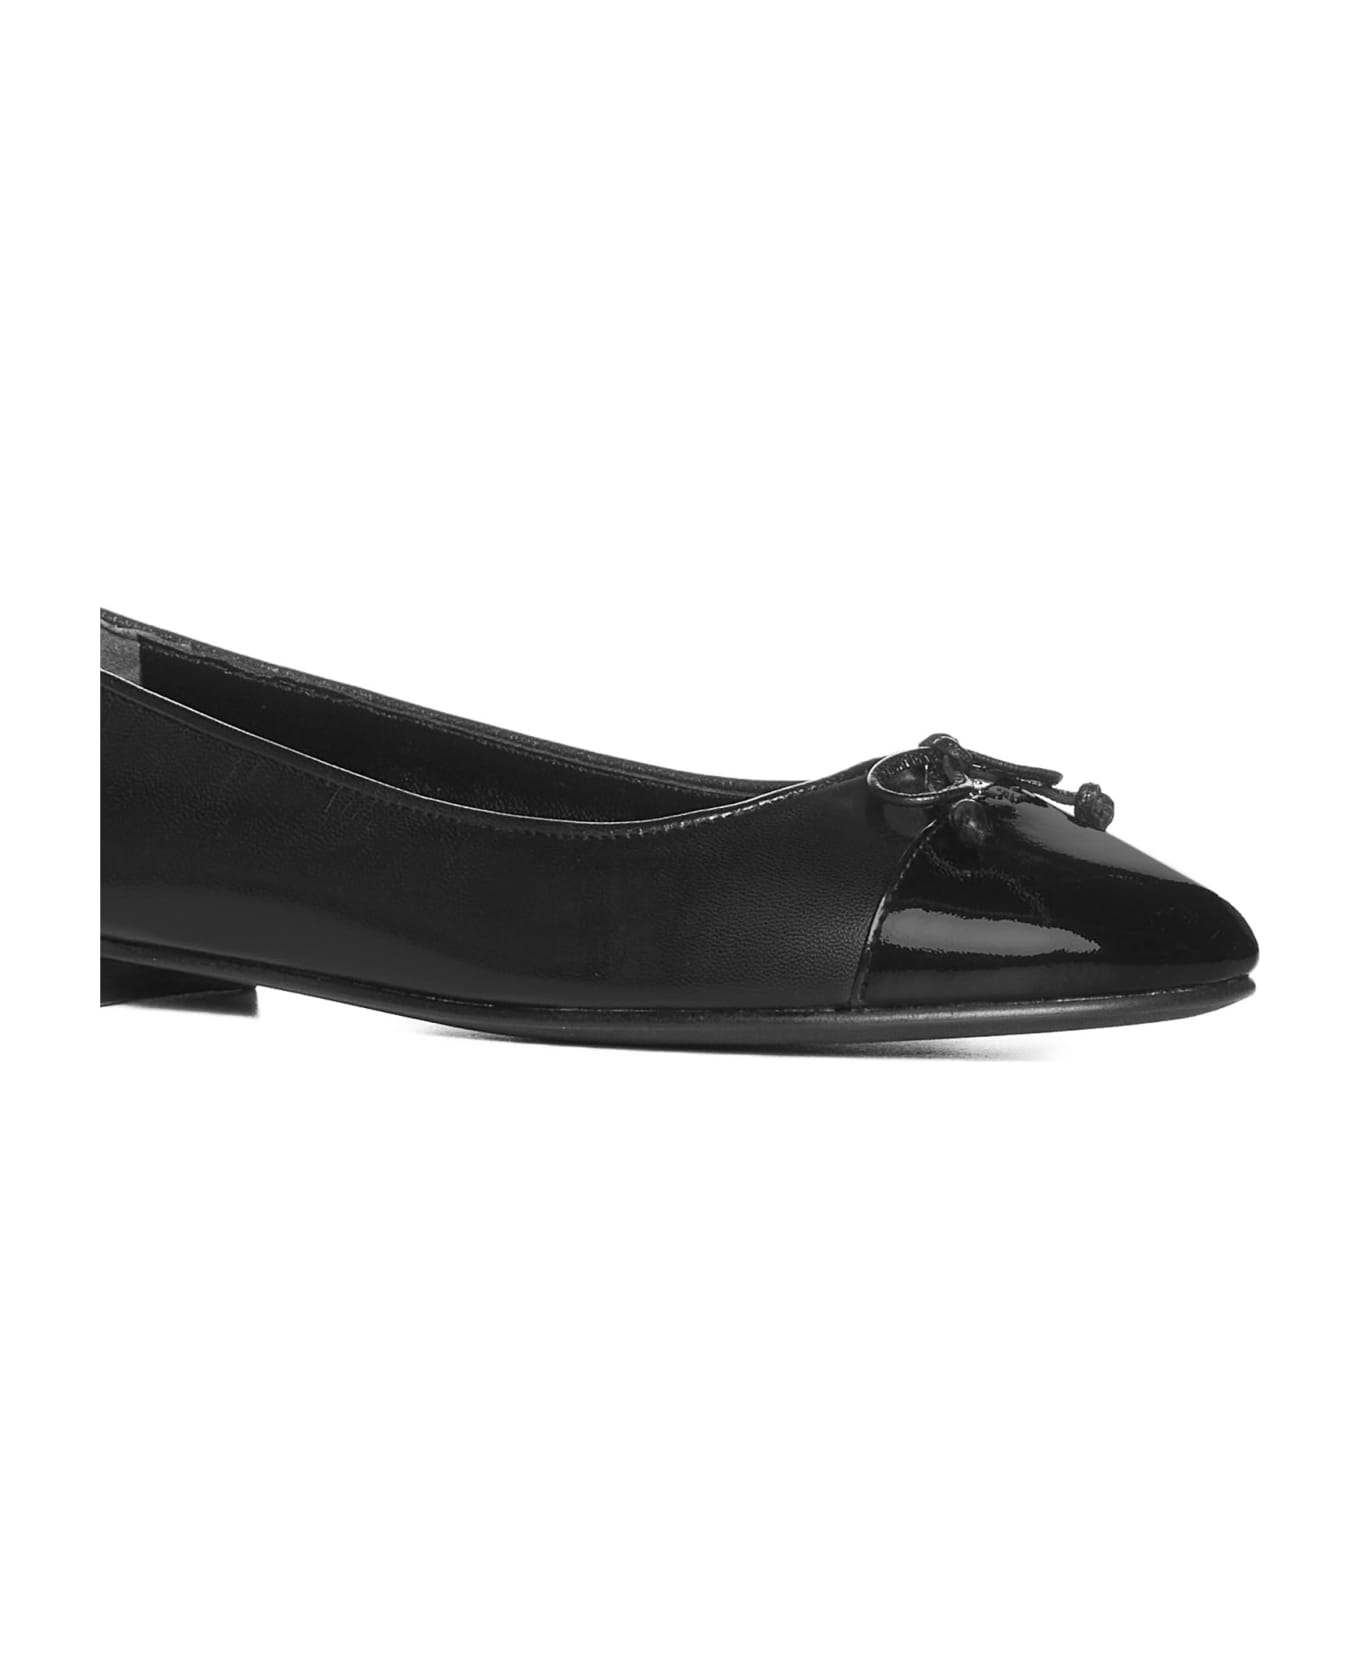 Tory Burch Bow Ballets - Perfect Black/perfect Black フラットシューズ